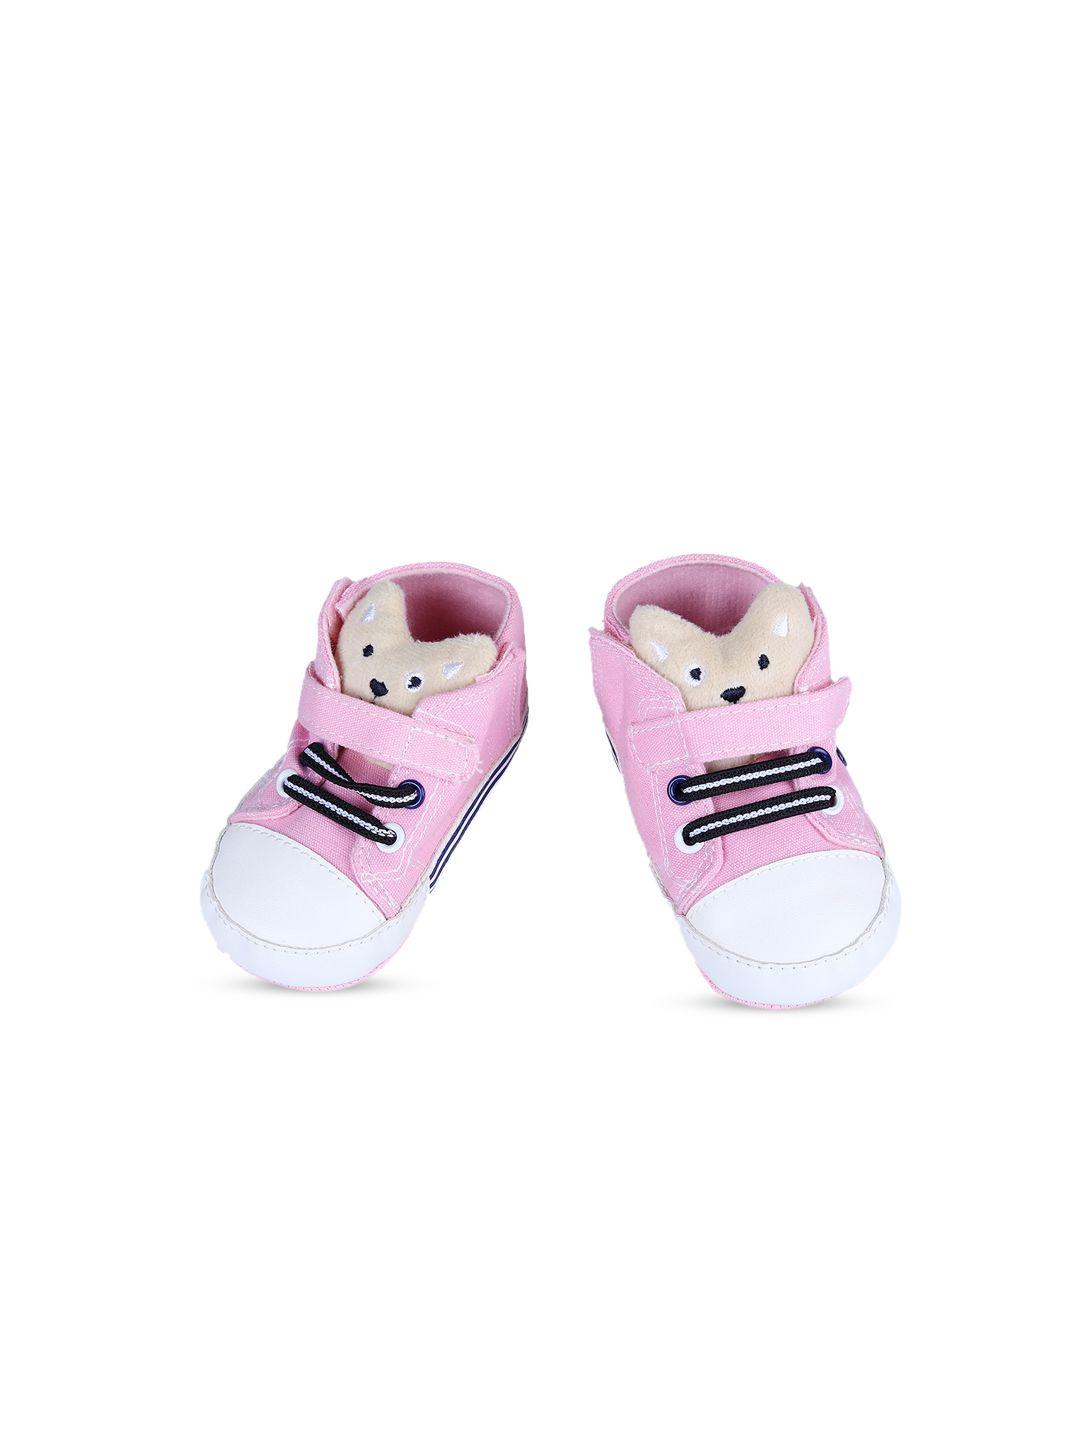 baby moo kids pink & white my buddy bear cute applique booties